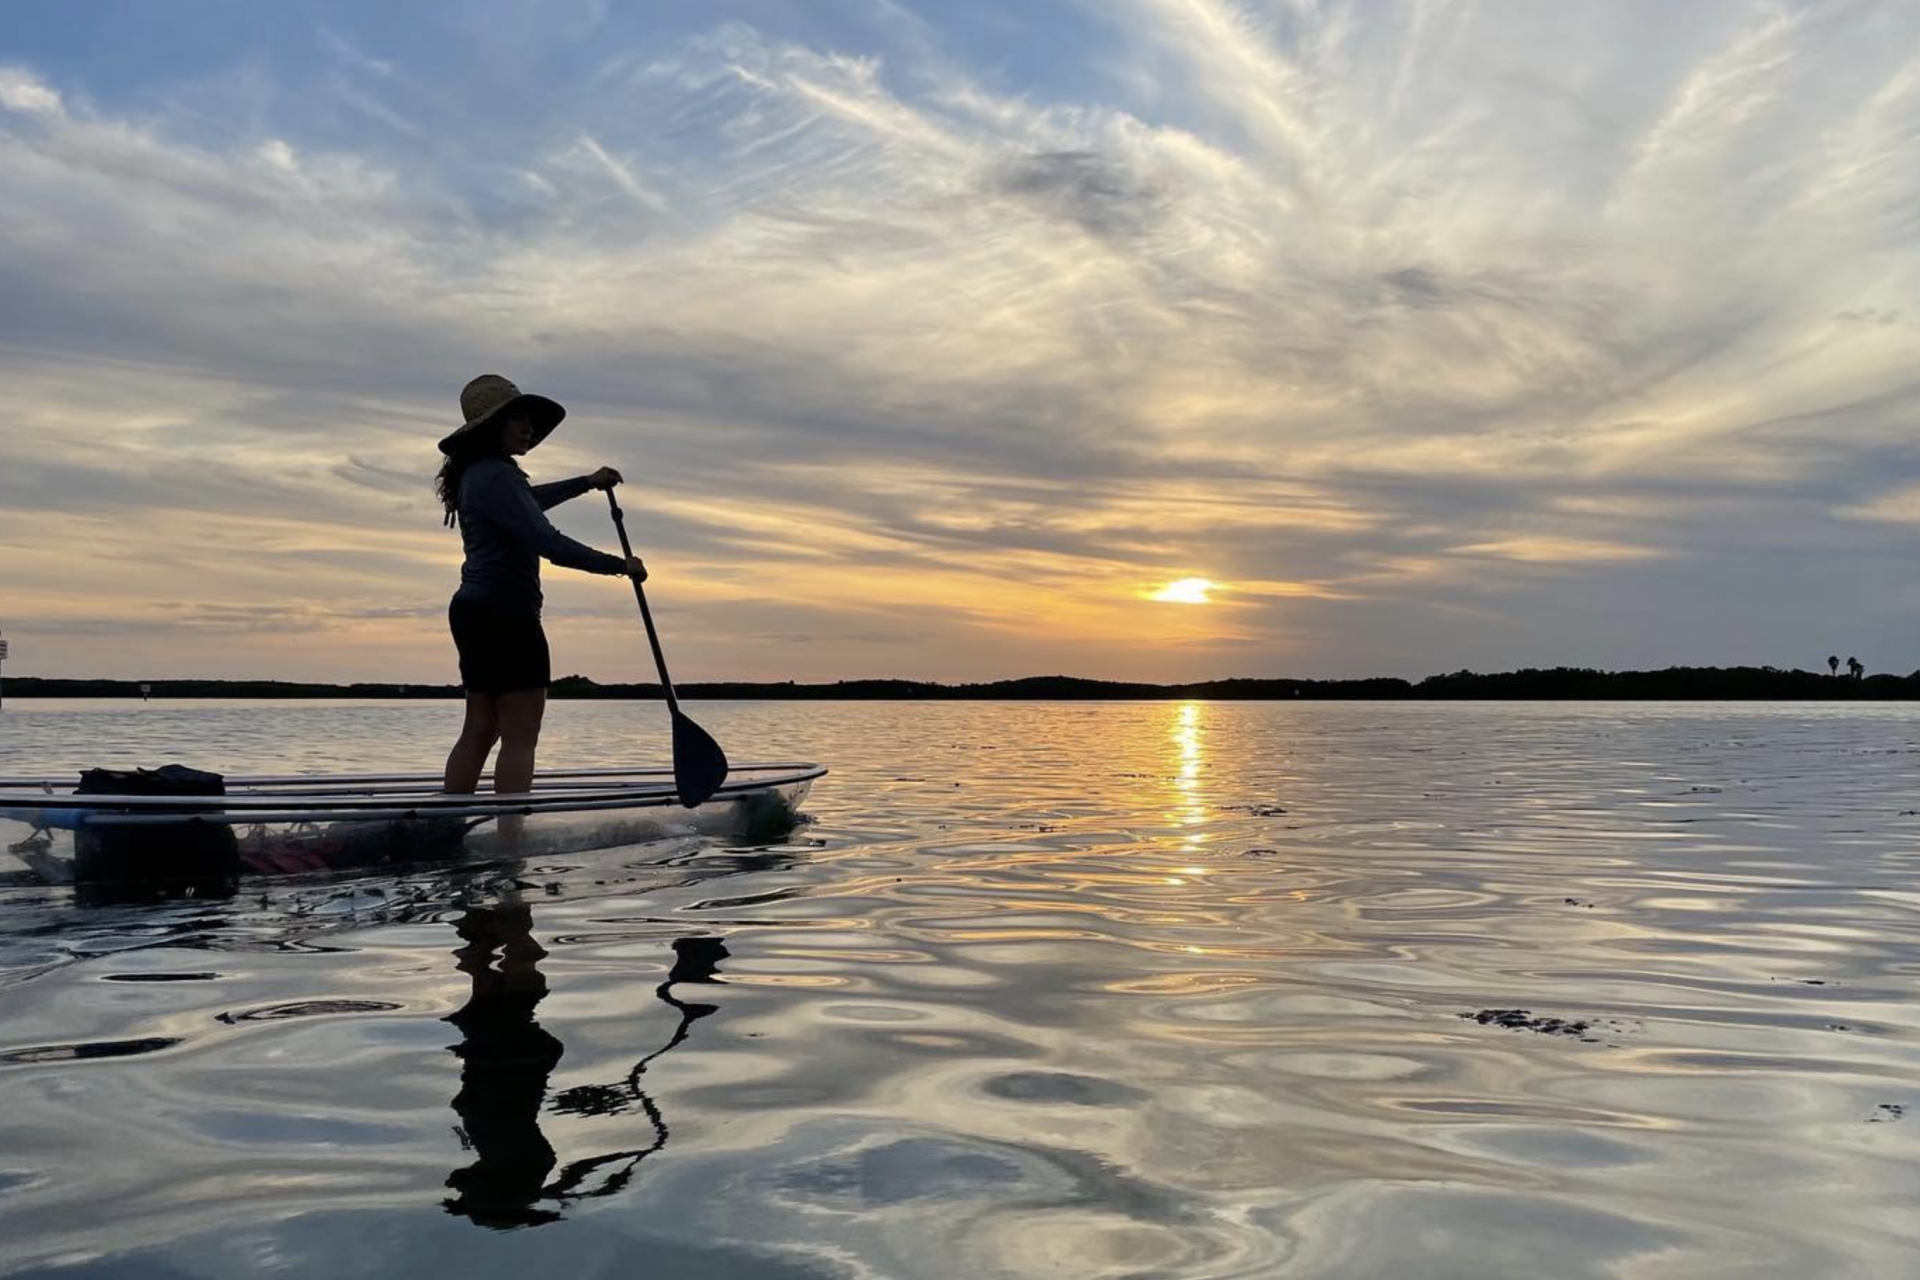 <p>A kayak tour around Tampa Bay offers an experience beyond the senses. Their clear kayaks allow you to paddle through crystal clear water and see what's underneath you. Mind-blowing.</p> <p>Image: Facebook - Get Up And Go Kayaking</p>